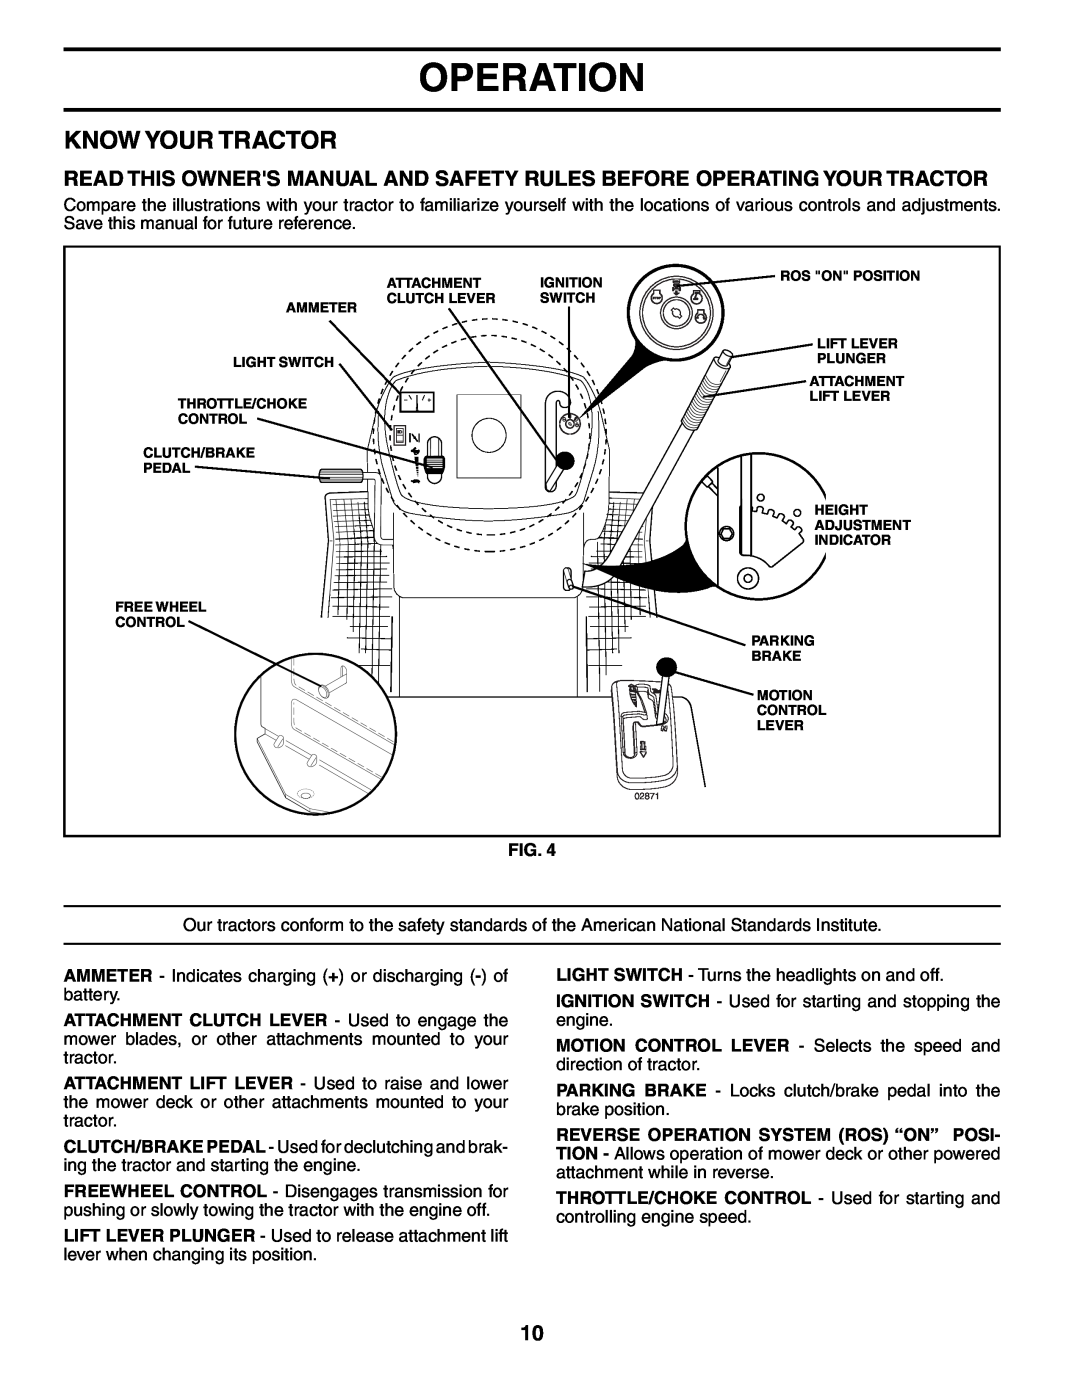 Poulan HDK19H42 manual Know Your Tractor, Operation 